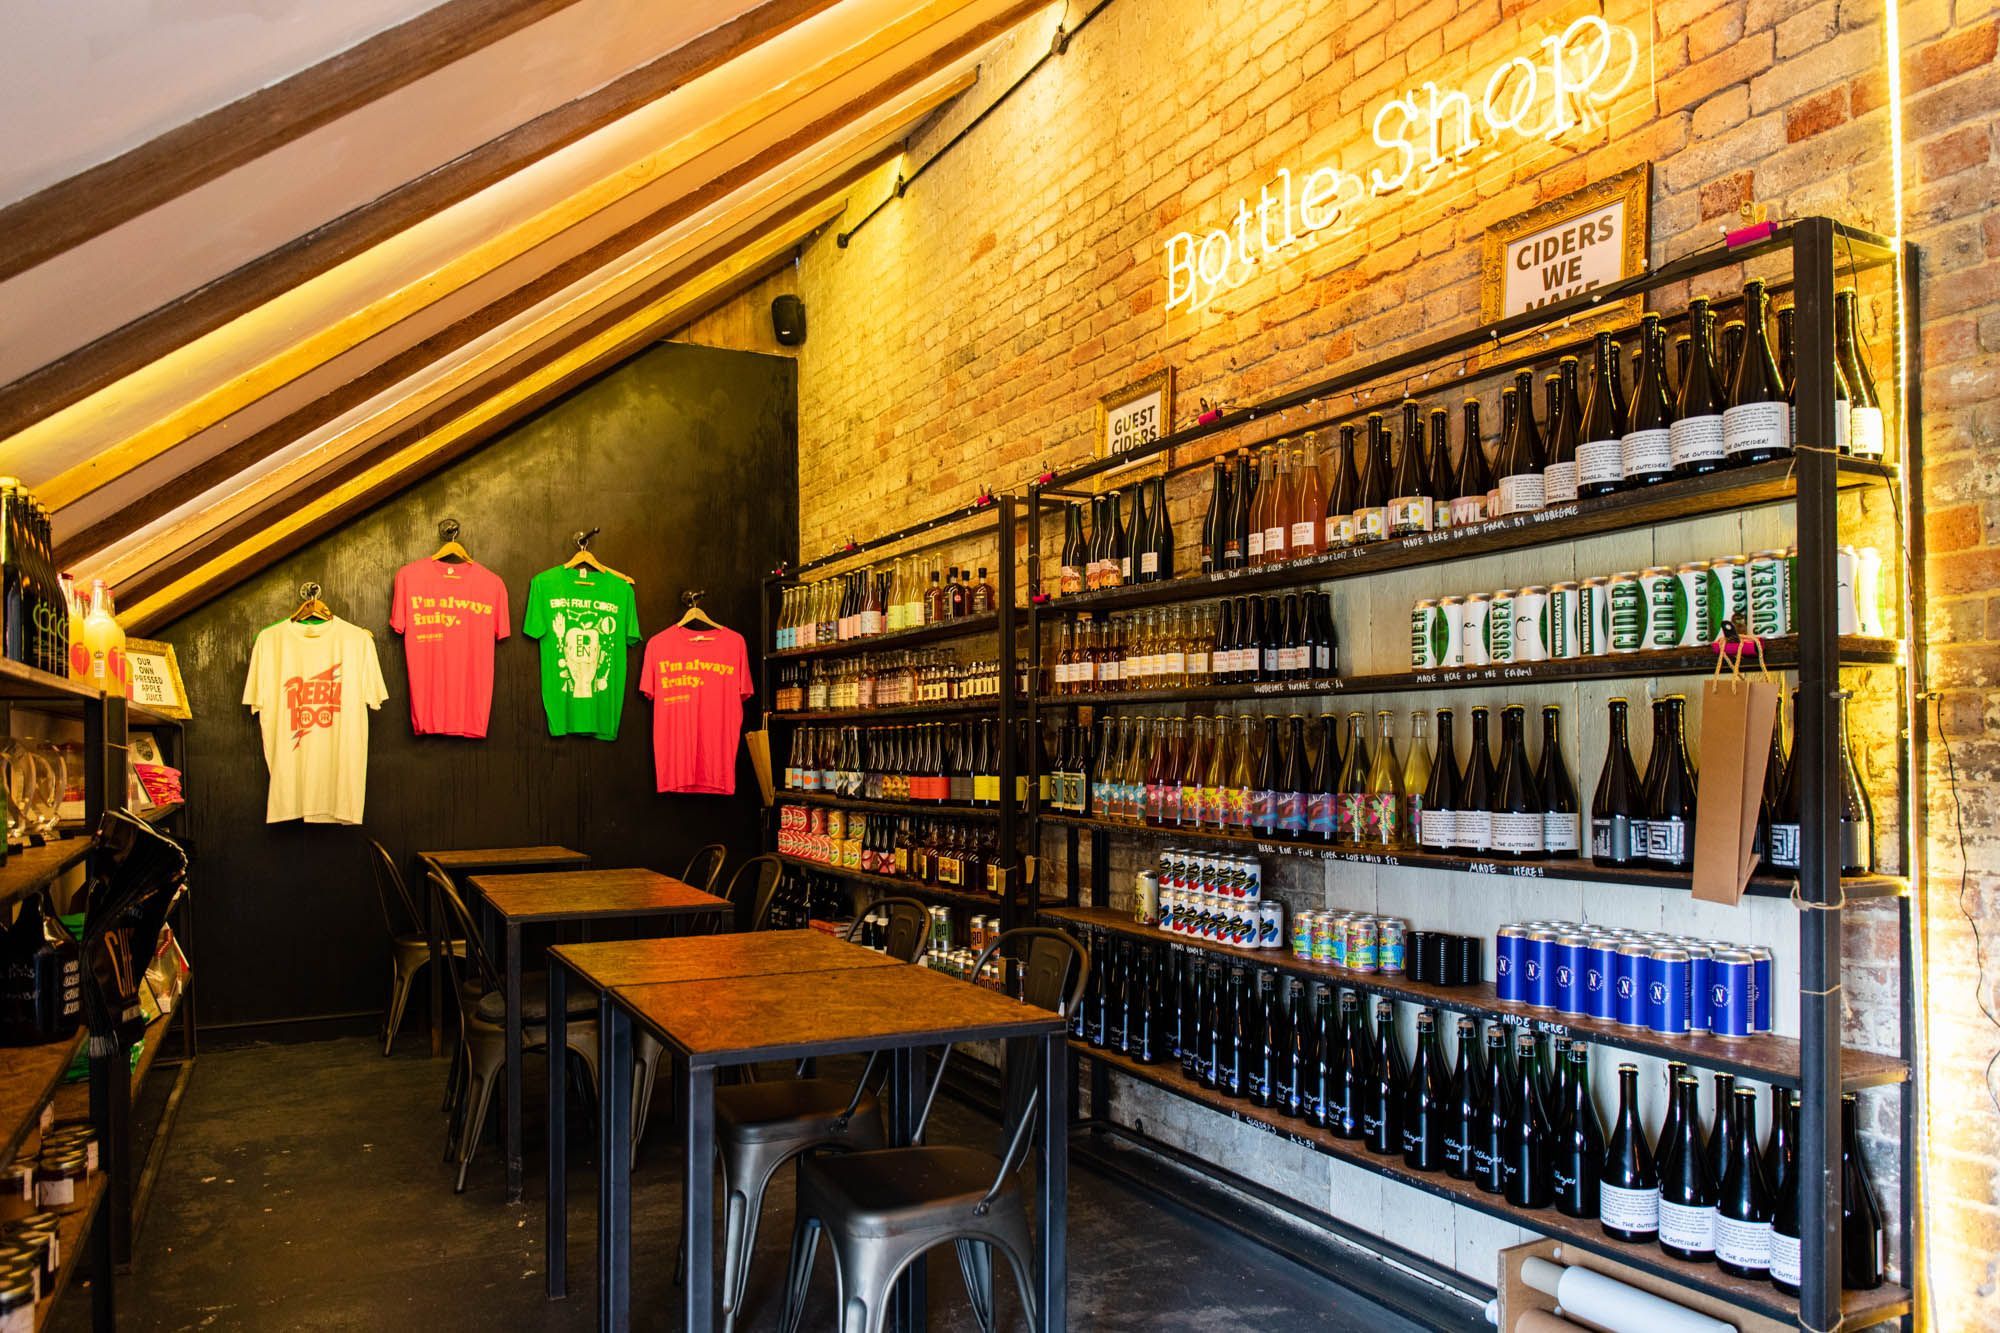 The Cider Tap Sussex Bottle Shop part of the restaurant, black shelf suit filled with various alcoholic drinks, white, pink and green shirts hanging on the wall